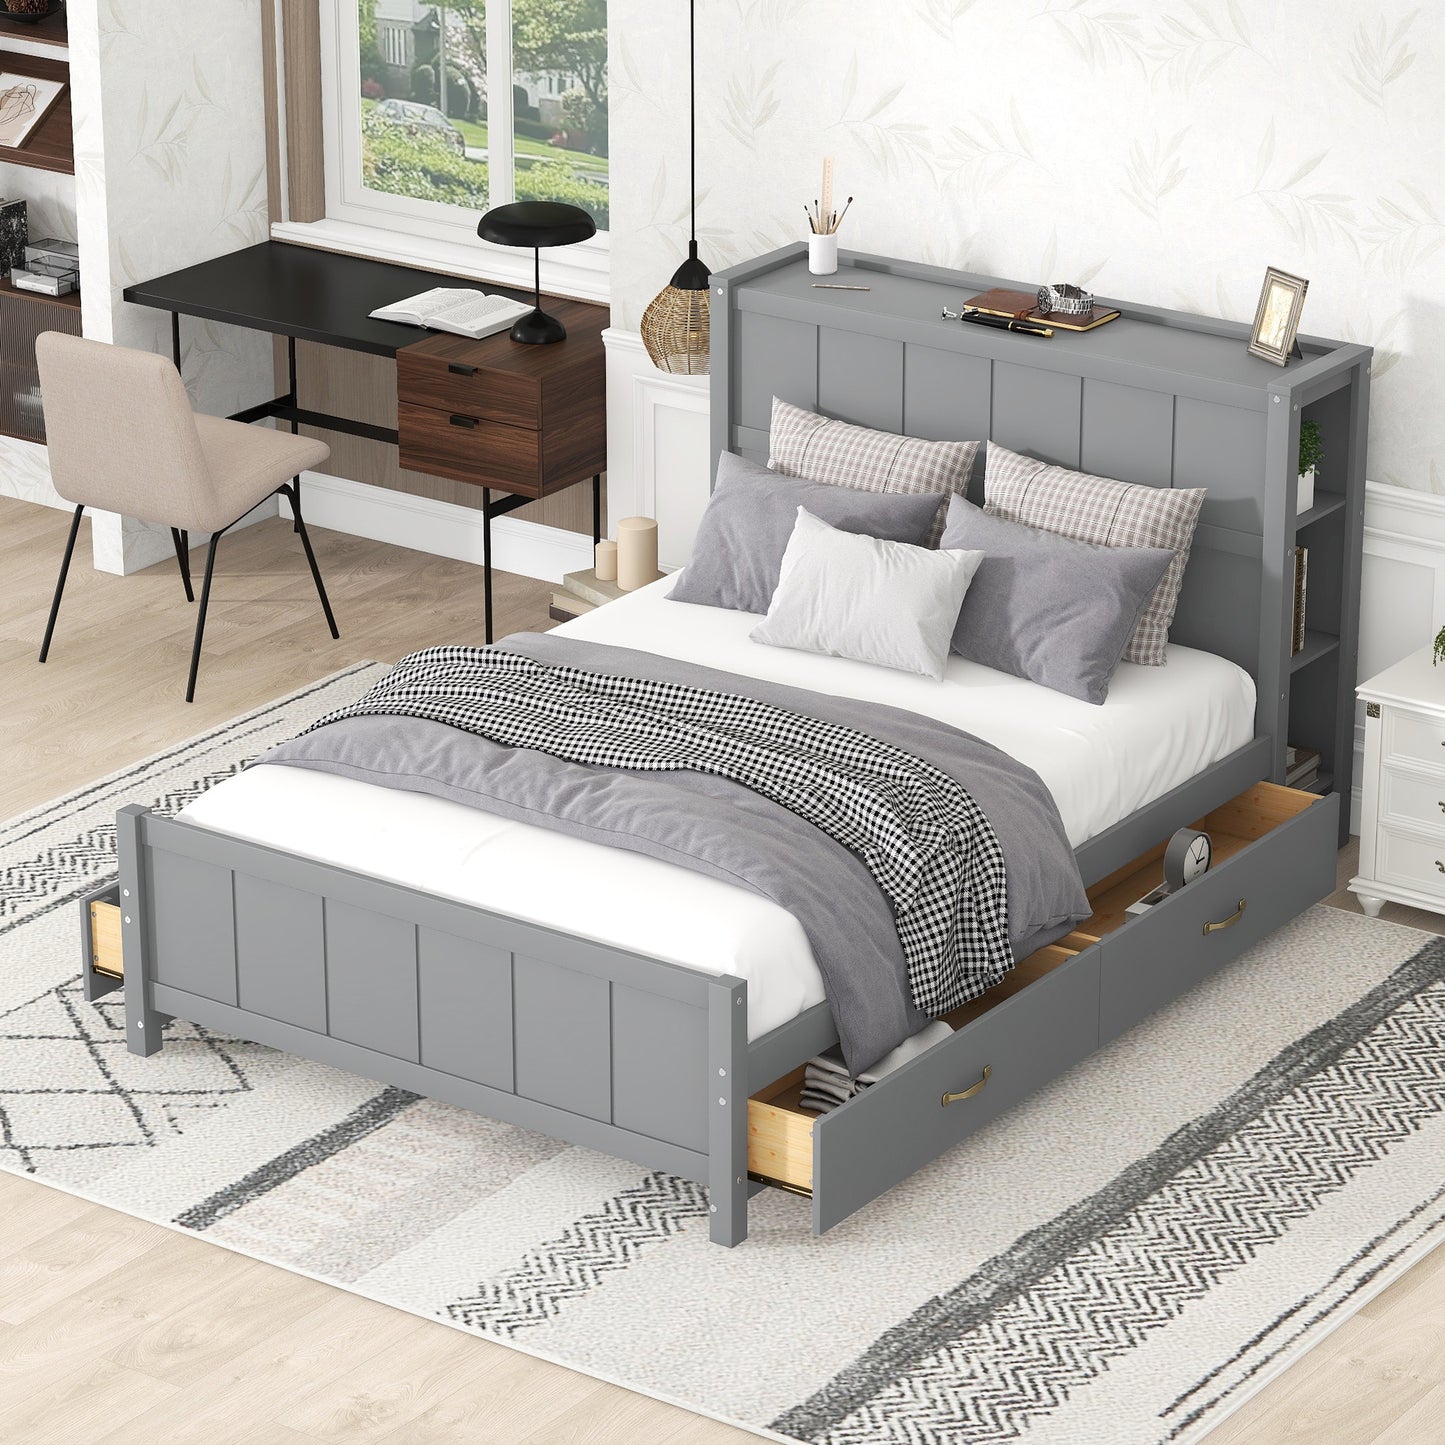 Ron Full Size Storage Bed (gray)